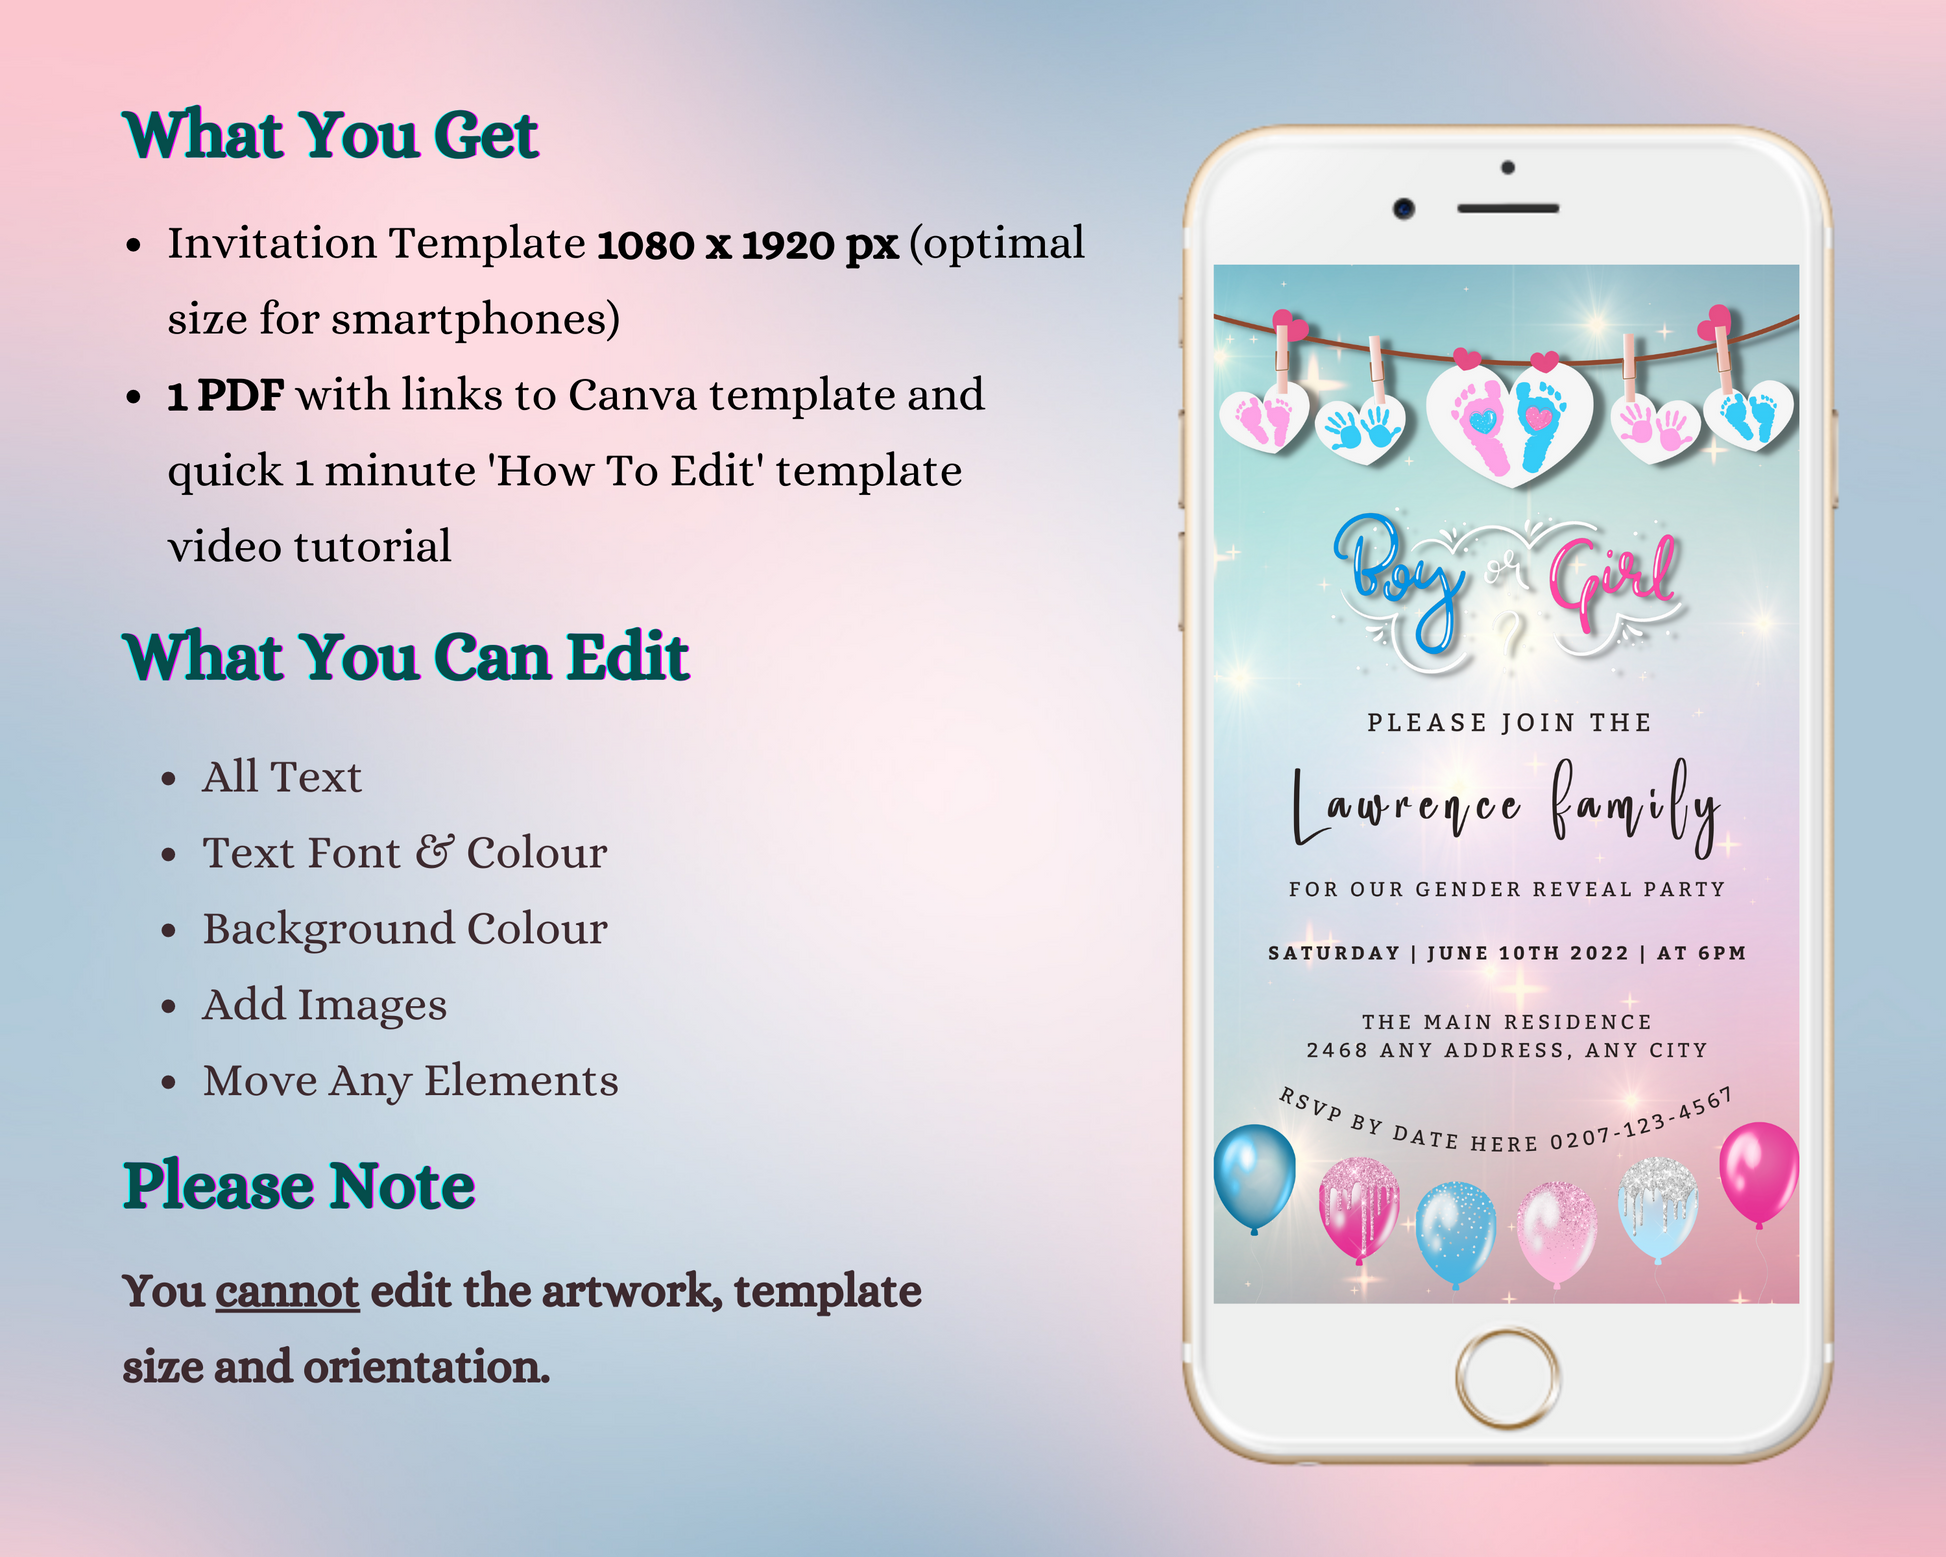 Customizable digital gender reveal evite with sparkling hanging hearts on a smartphone screen, designed for editing and sharing via Canva.